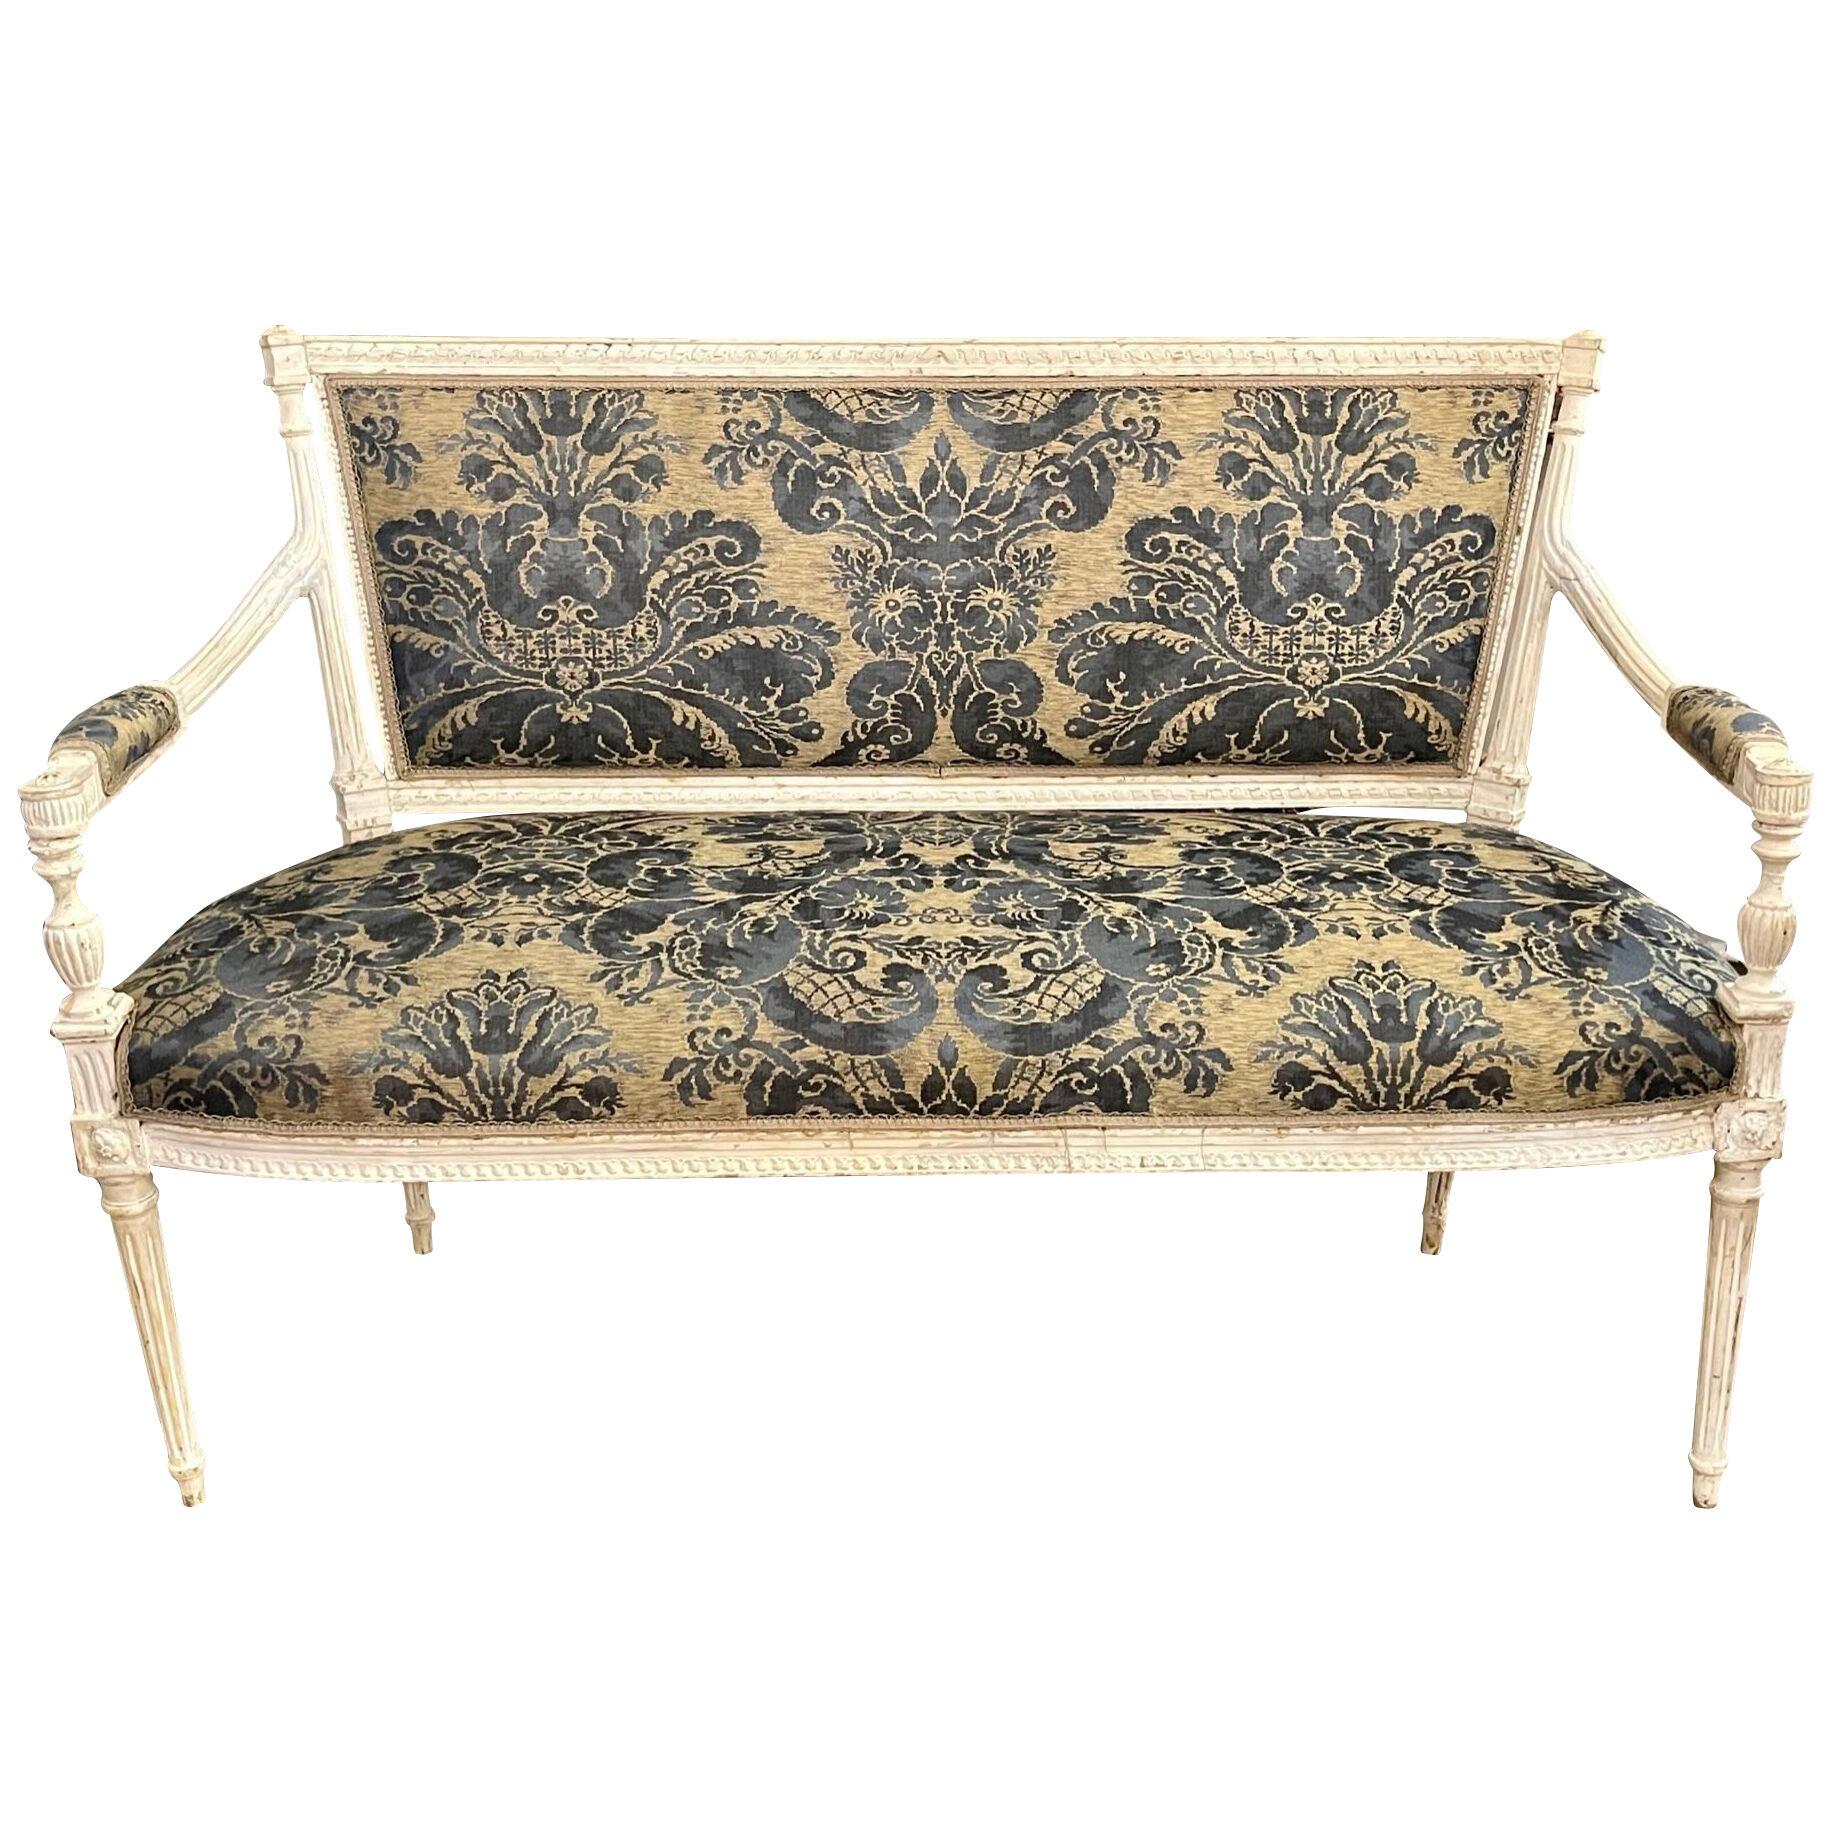 19th Century French Louis XVI Style Carved and Painted Settee